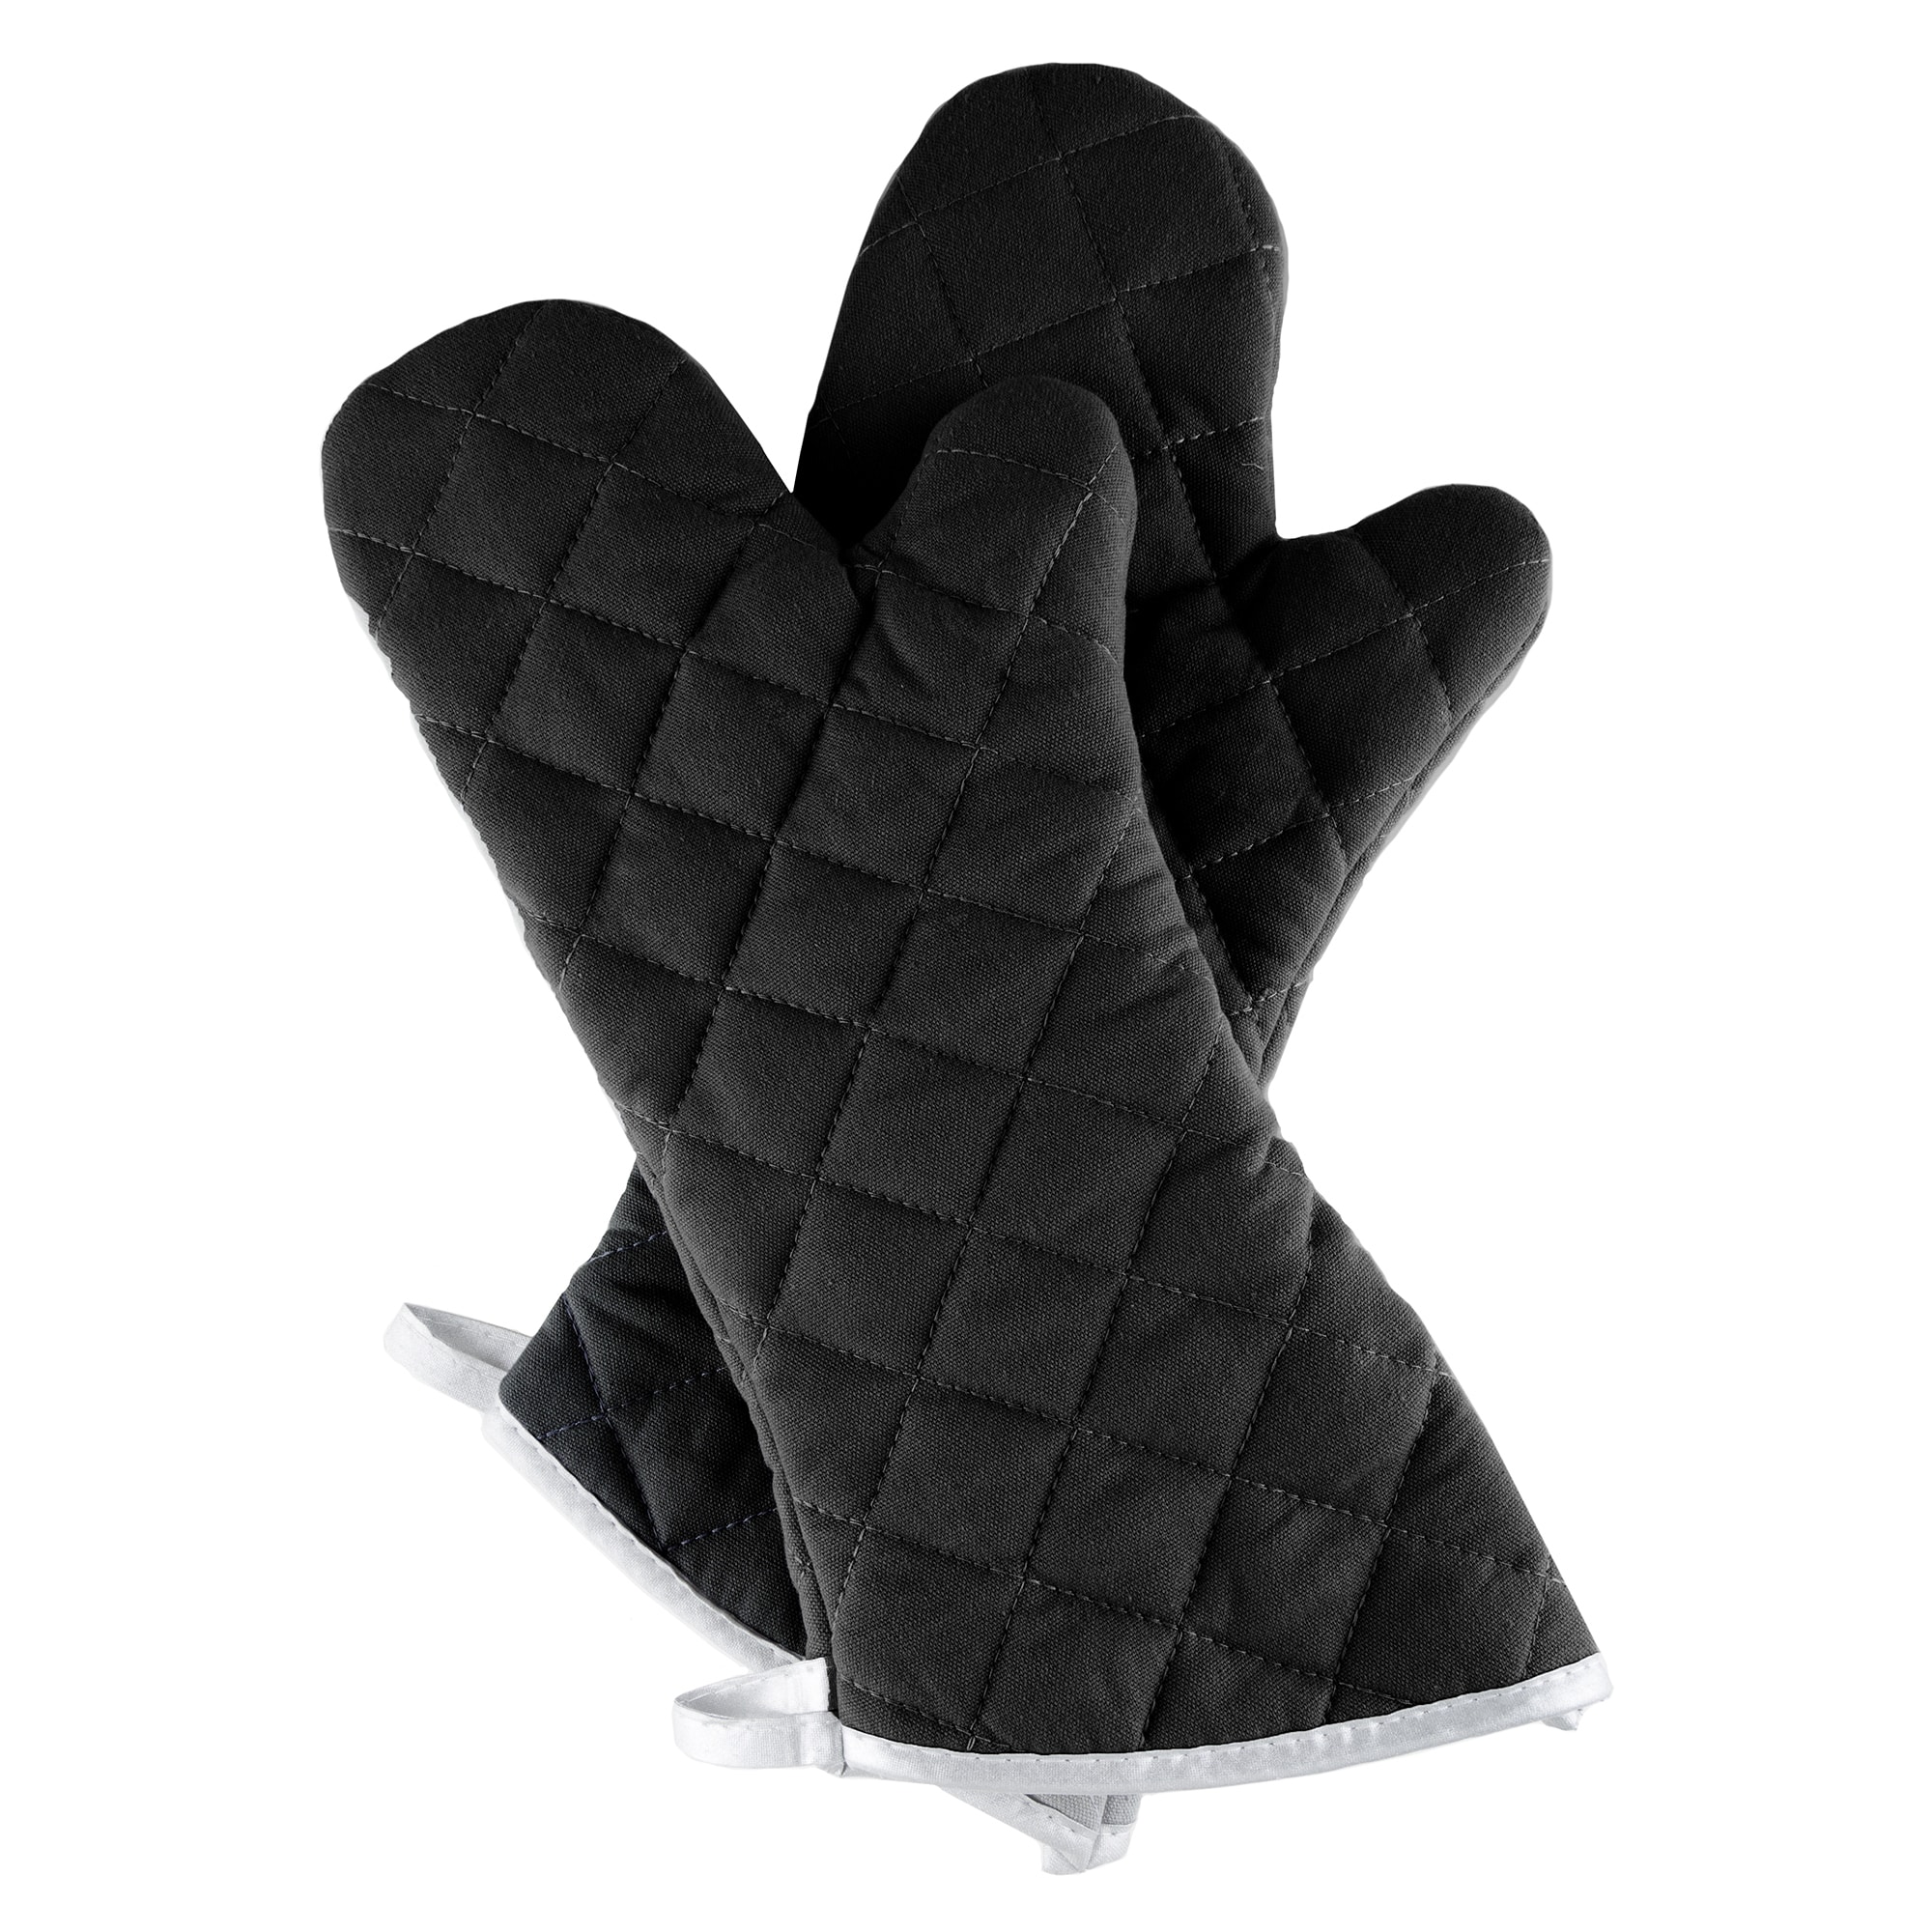 https://ak1.ostkcdn.com/images/products/15635839/Oven-Mitts-Set-of-2-Oversized-Quilted-Mittens-Flame-and-Heat-Resistant-By-Windsor-Home-208f3153-2b97-4303-b586-f308bda43fd7.jpg